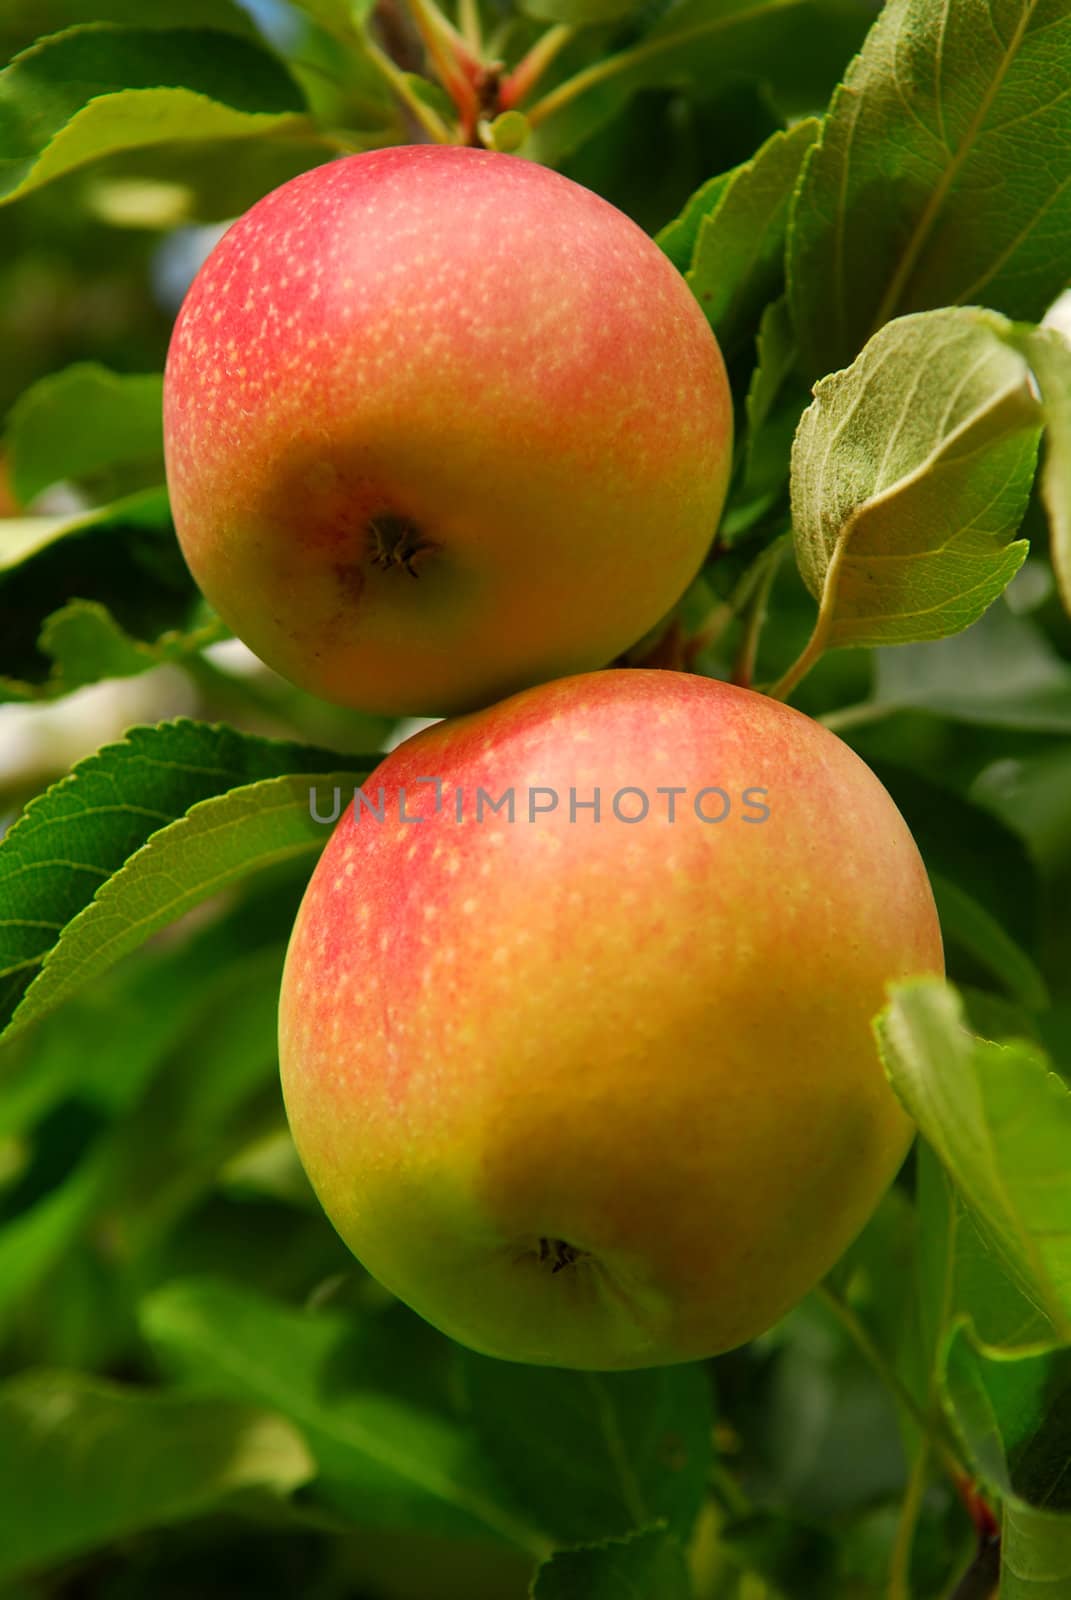 Two ripe red apples on a apple tree branch in an orchard